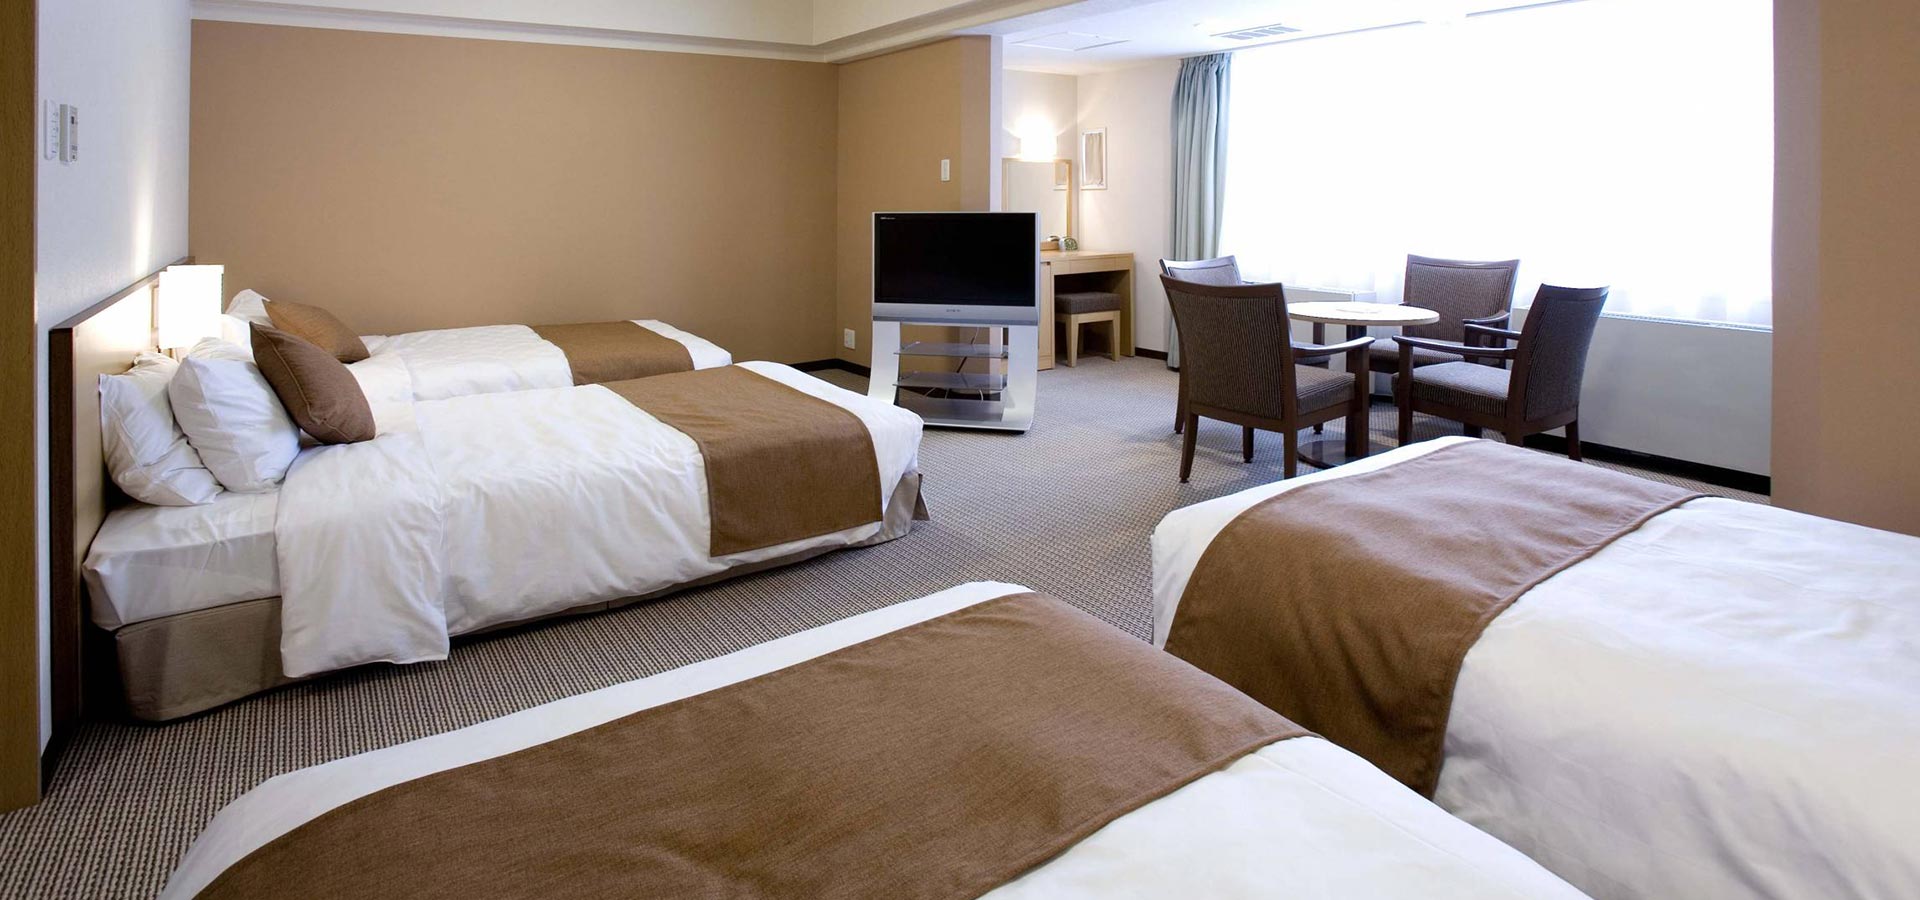 Family Room , Accommodation in Furano Prince Hotel